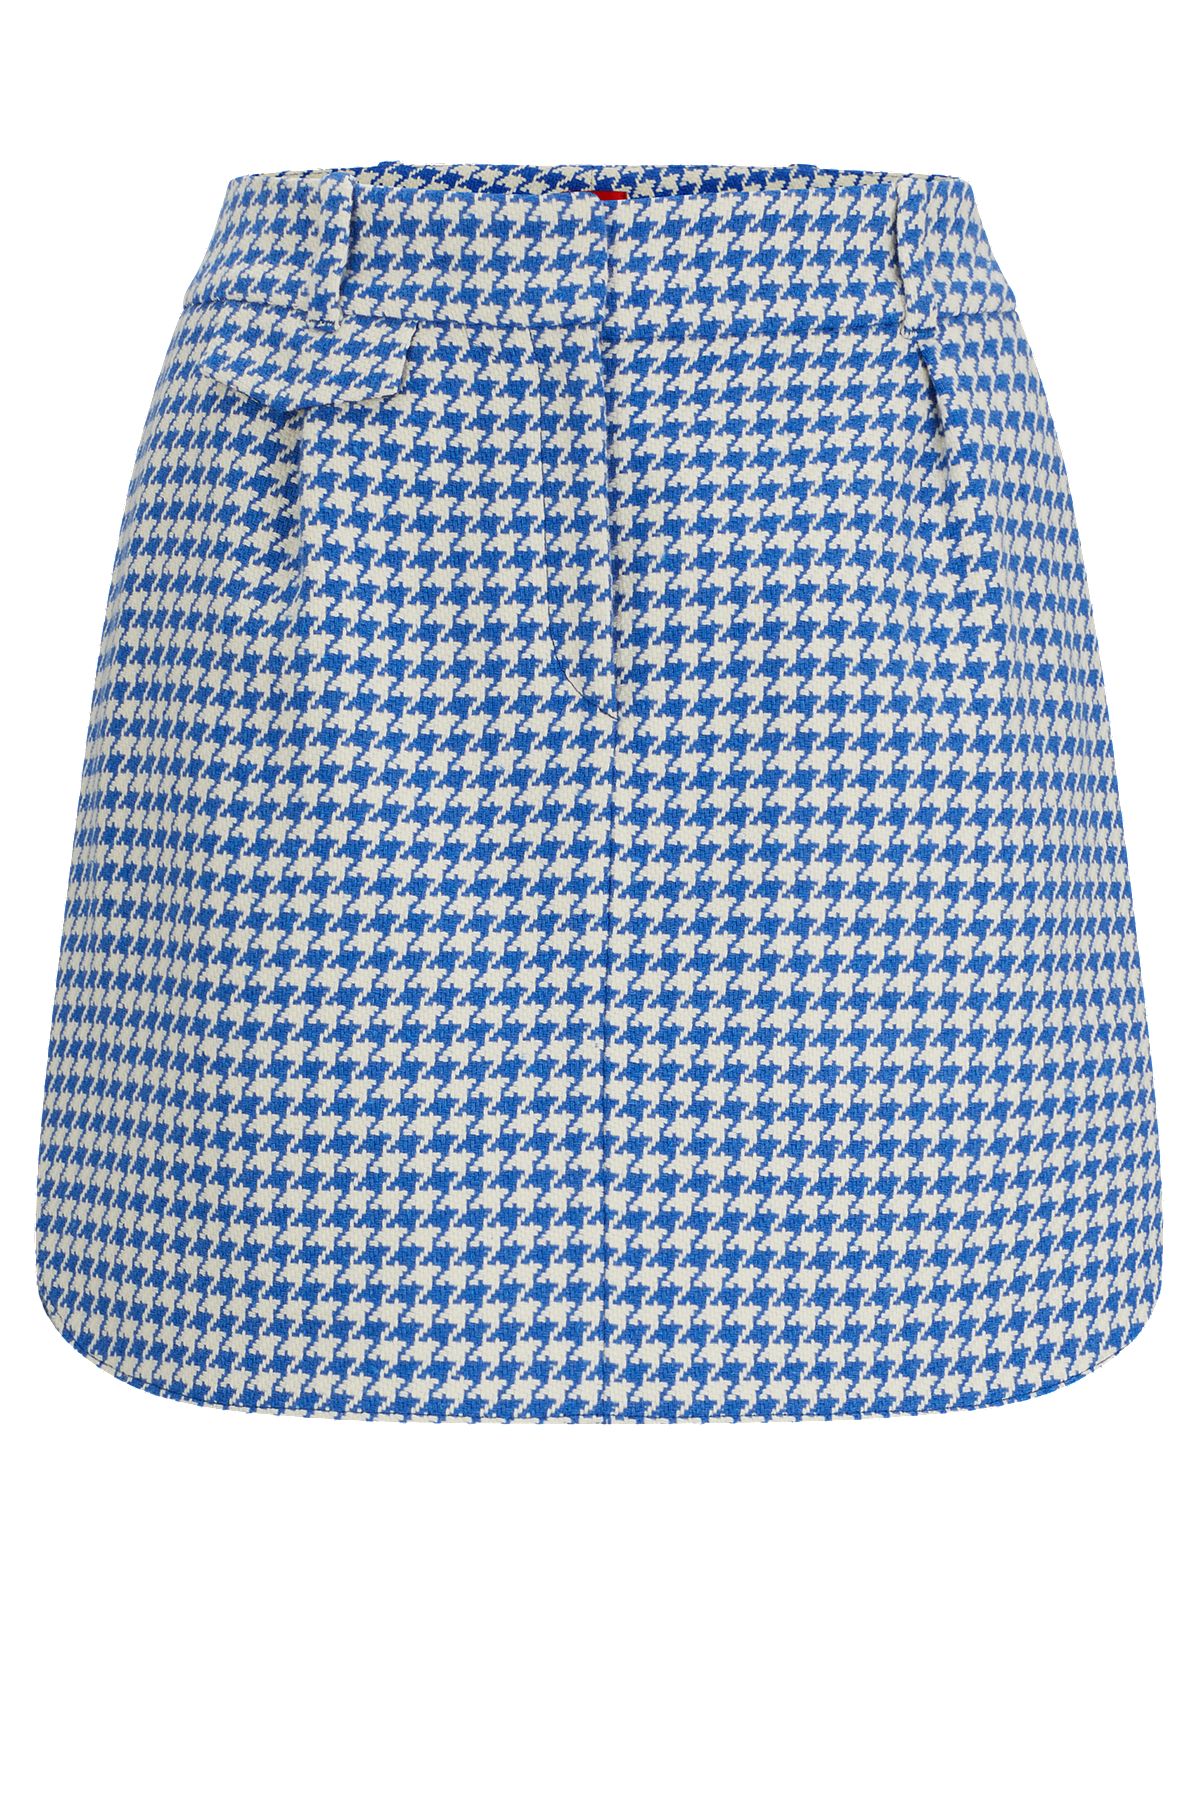 Houndstooth mini skirt in a cotton blend, Patterned